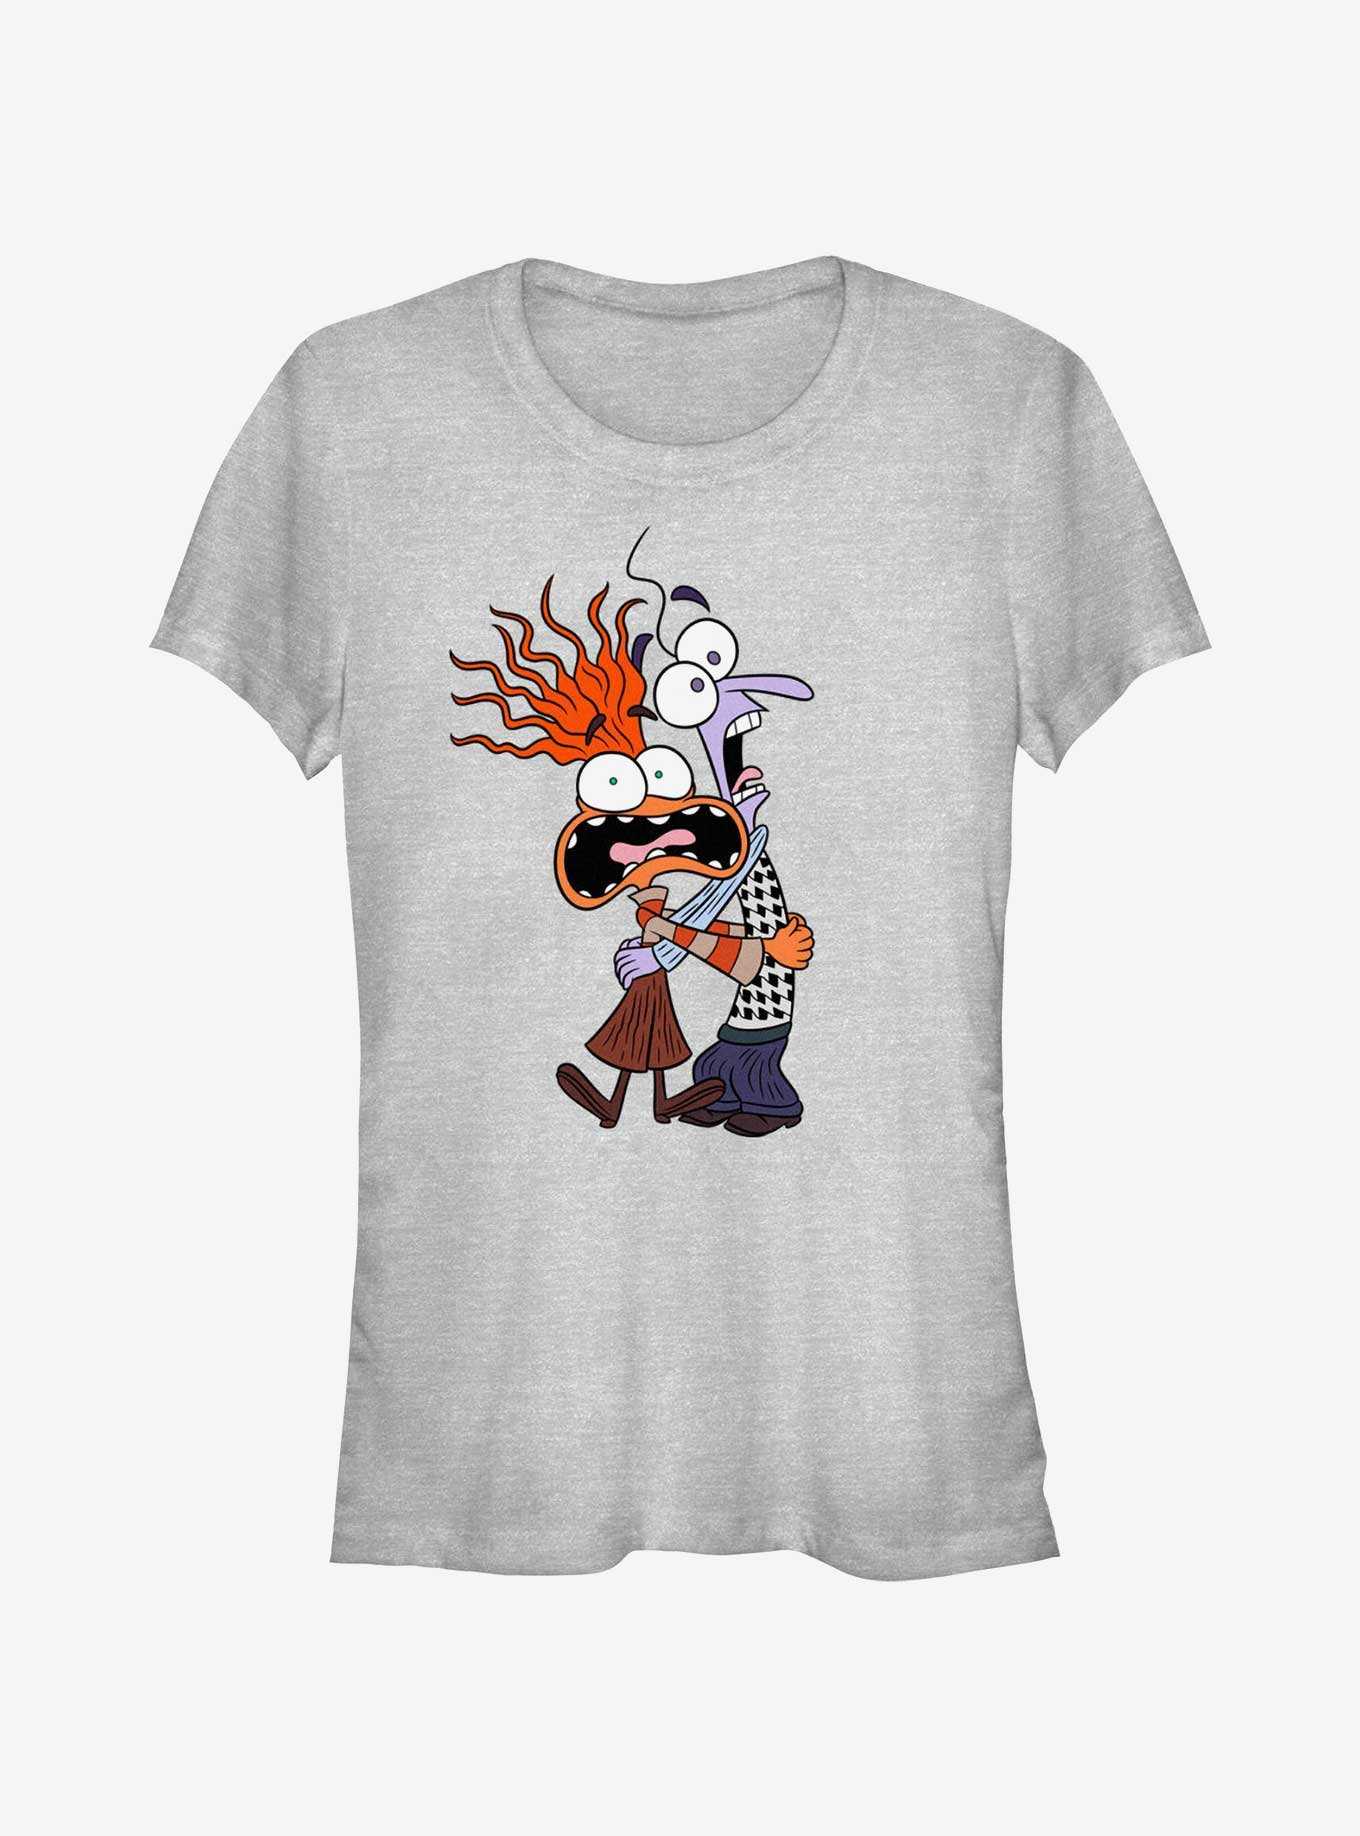 Disney Pixar Inside Out 2 Anxiety And Fear Girls T-Shirt, , hi-res